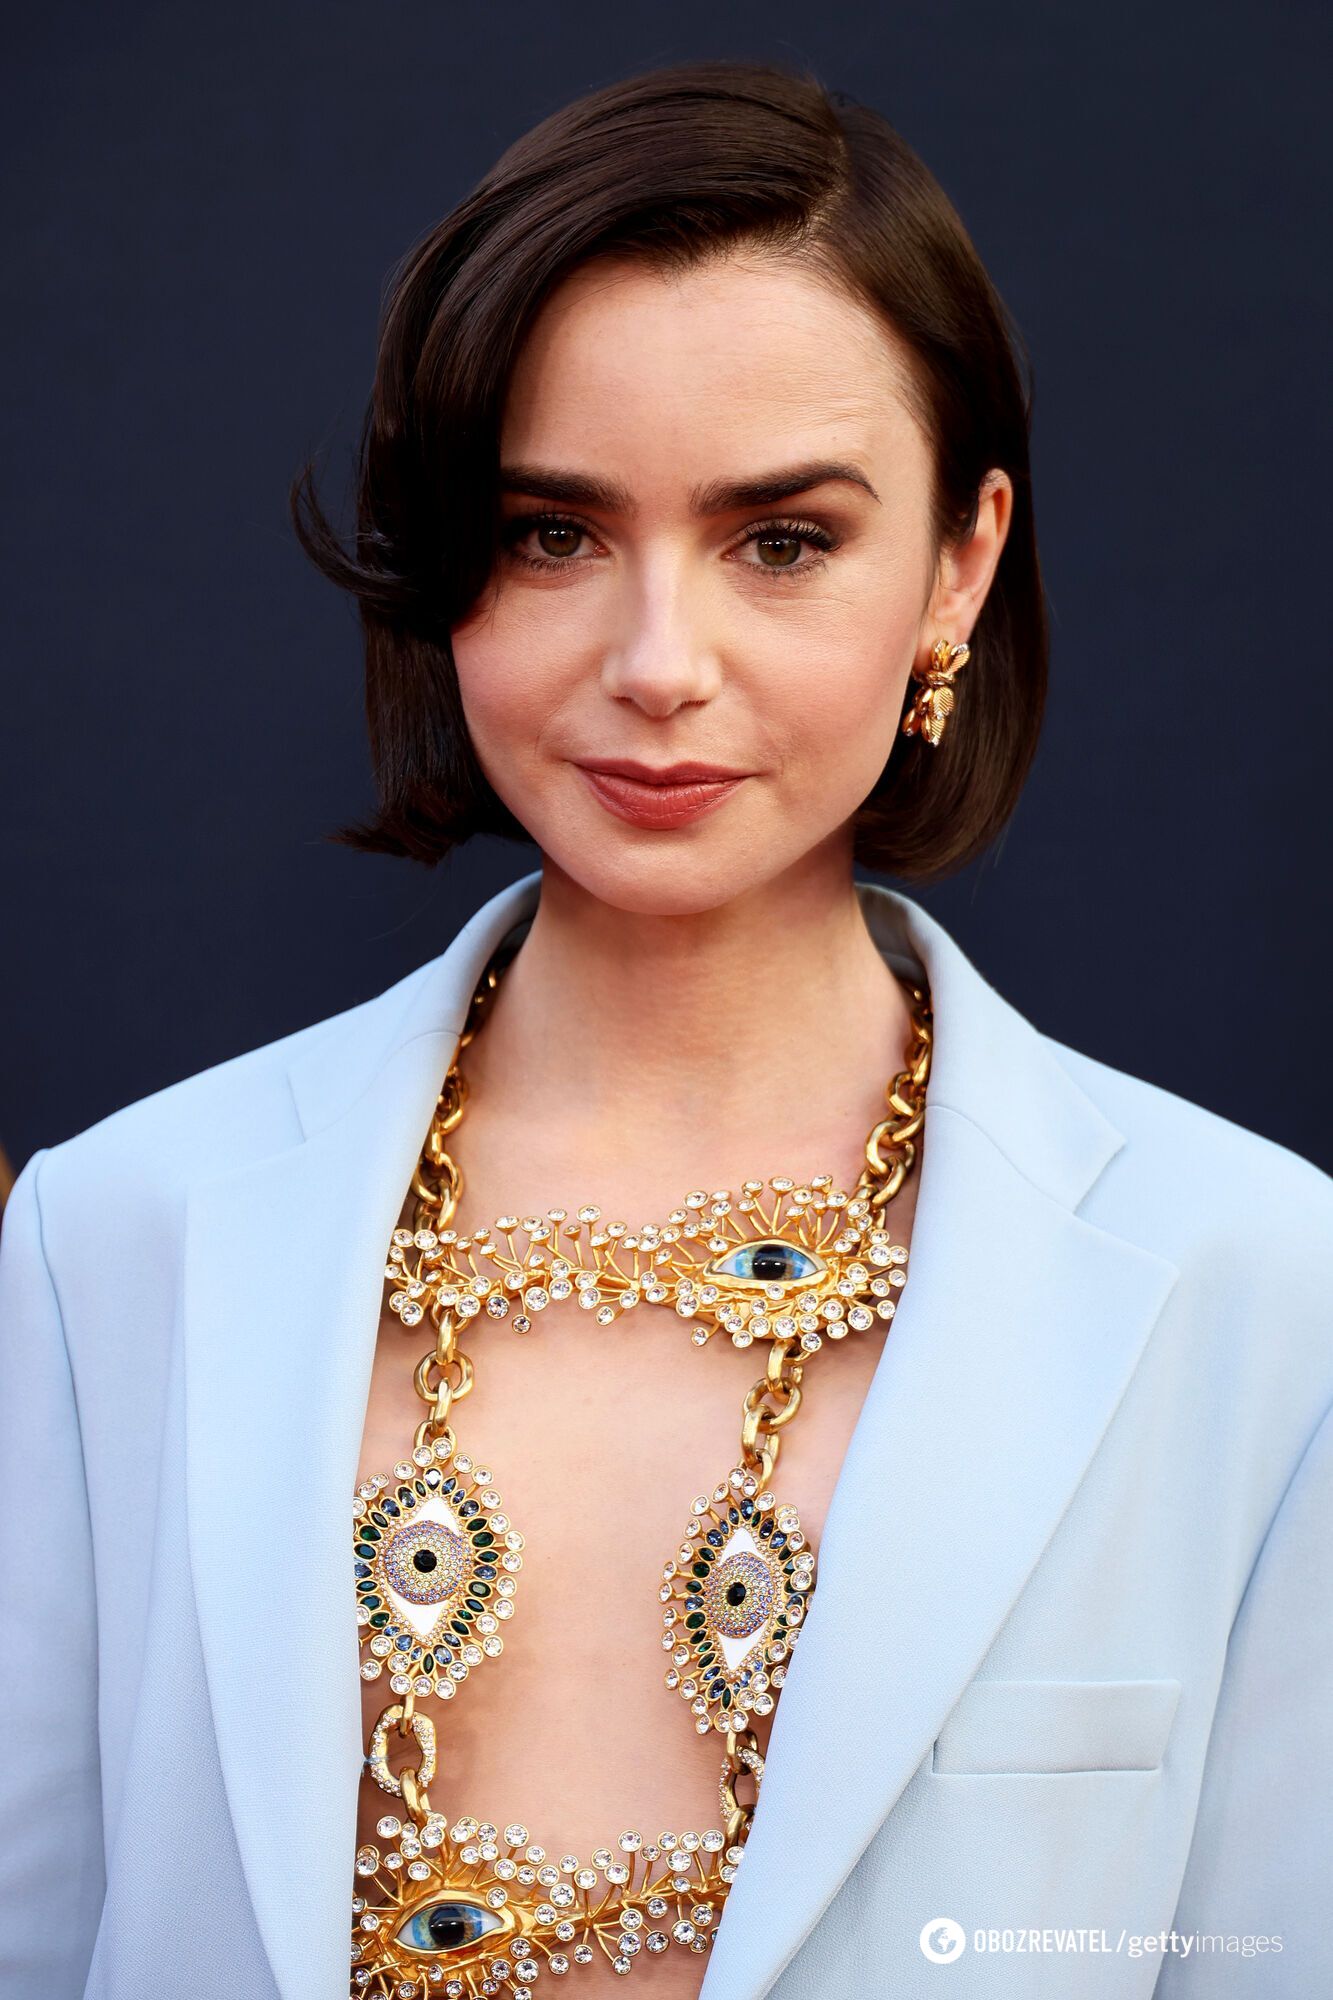 Emily in Paris star Lily Collins swapped her long locks for an elegant bob. Photos before and after